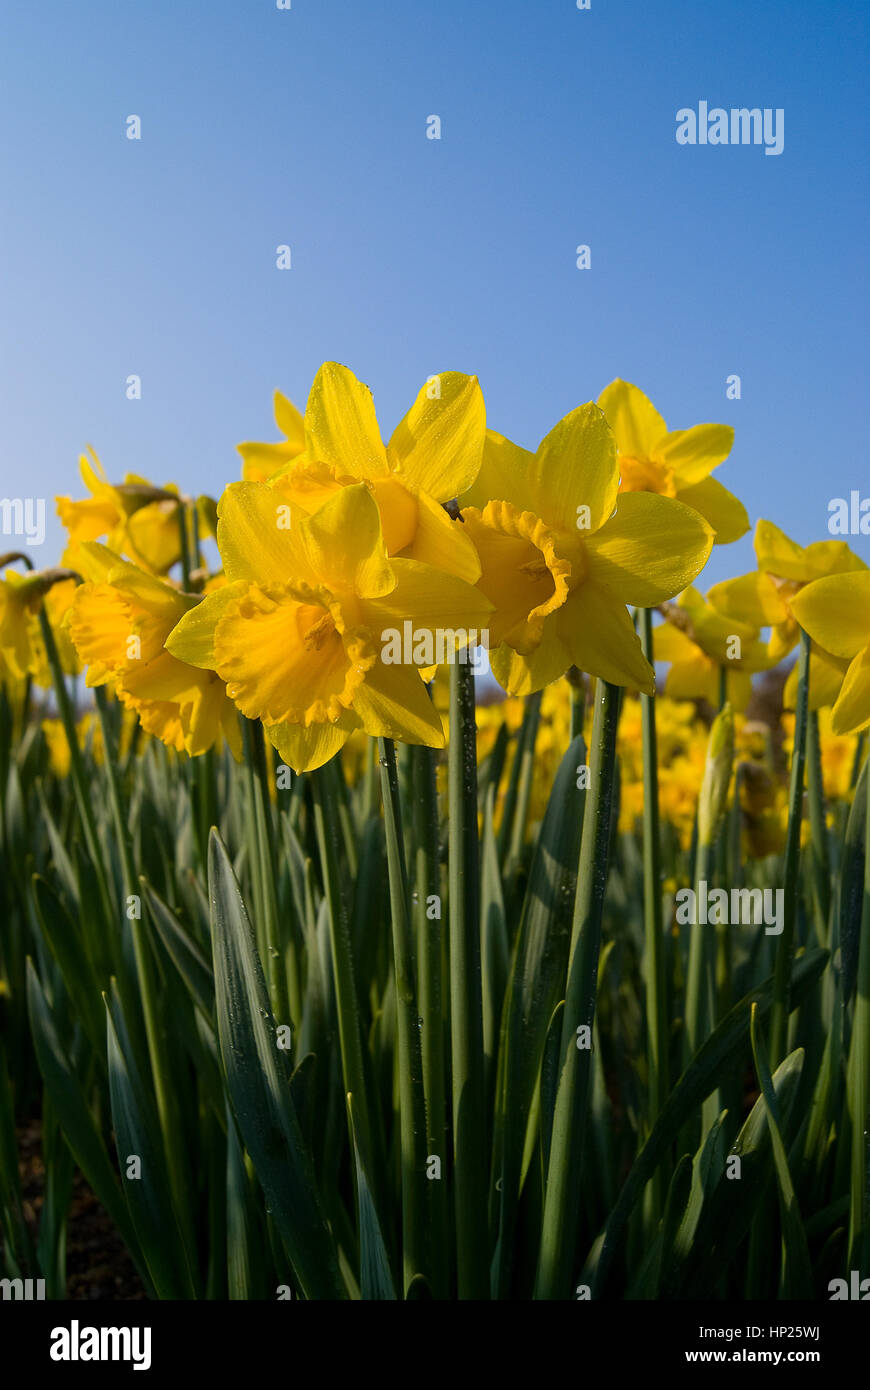 Daffodil flowers in spring Stock Photo - Alamy